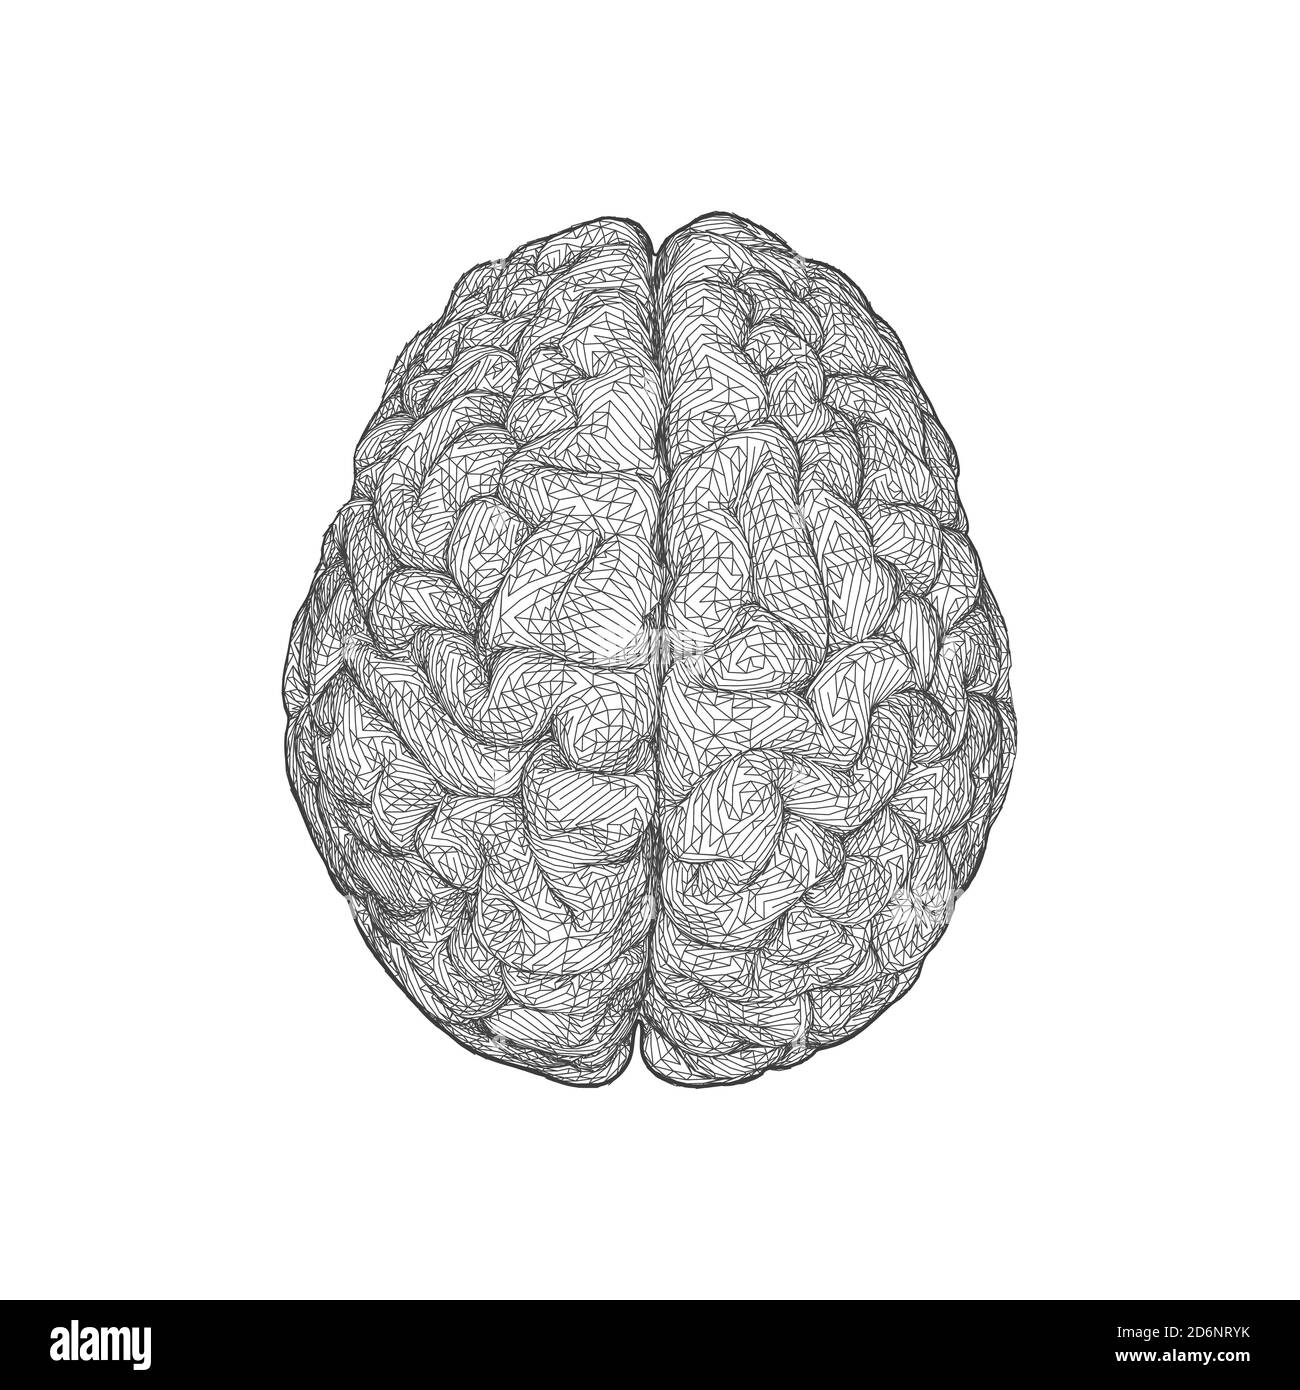 Low poly triangulate styllized brain illustration in top view isolated on white background Stock Photo